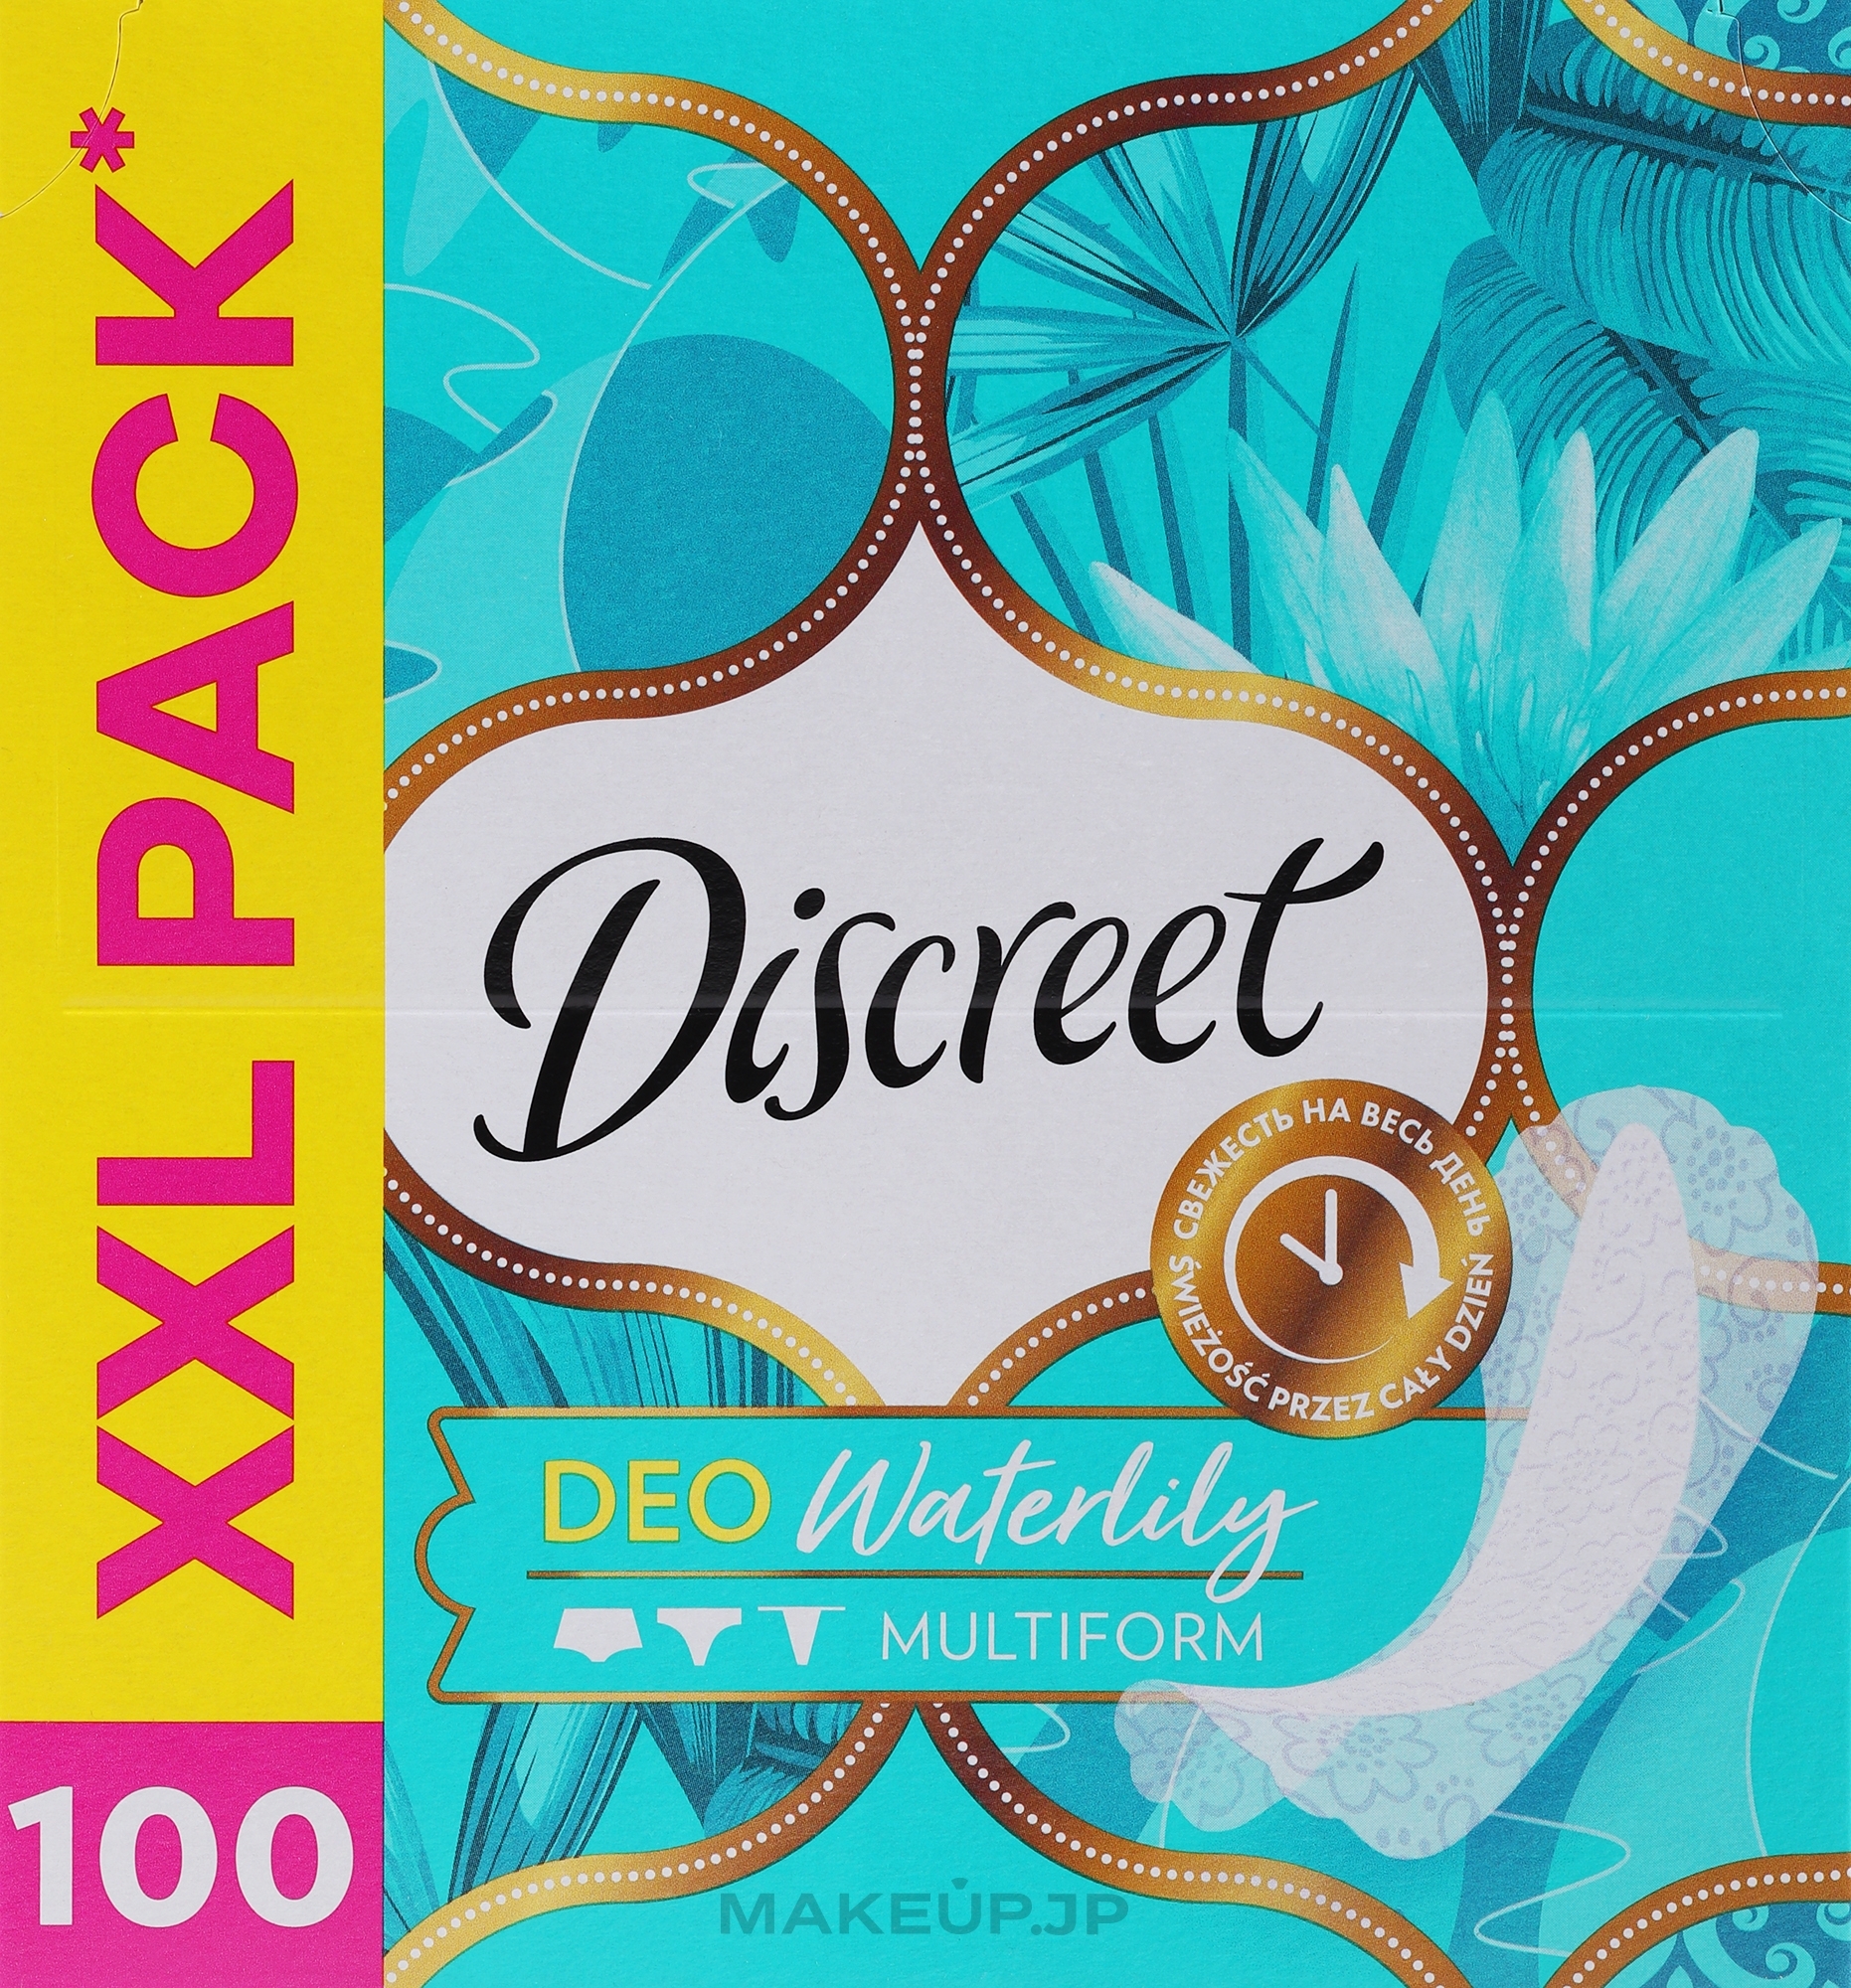 Daily Sanitary Pads Deo Water Lily, 100 pcs - Discreet — photo 100 szt.